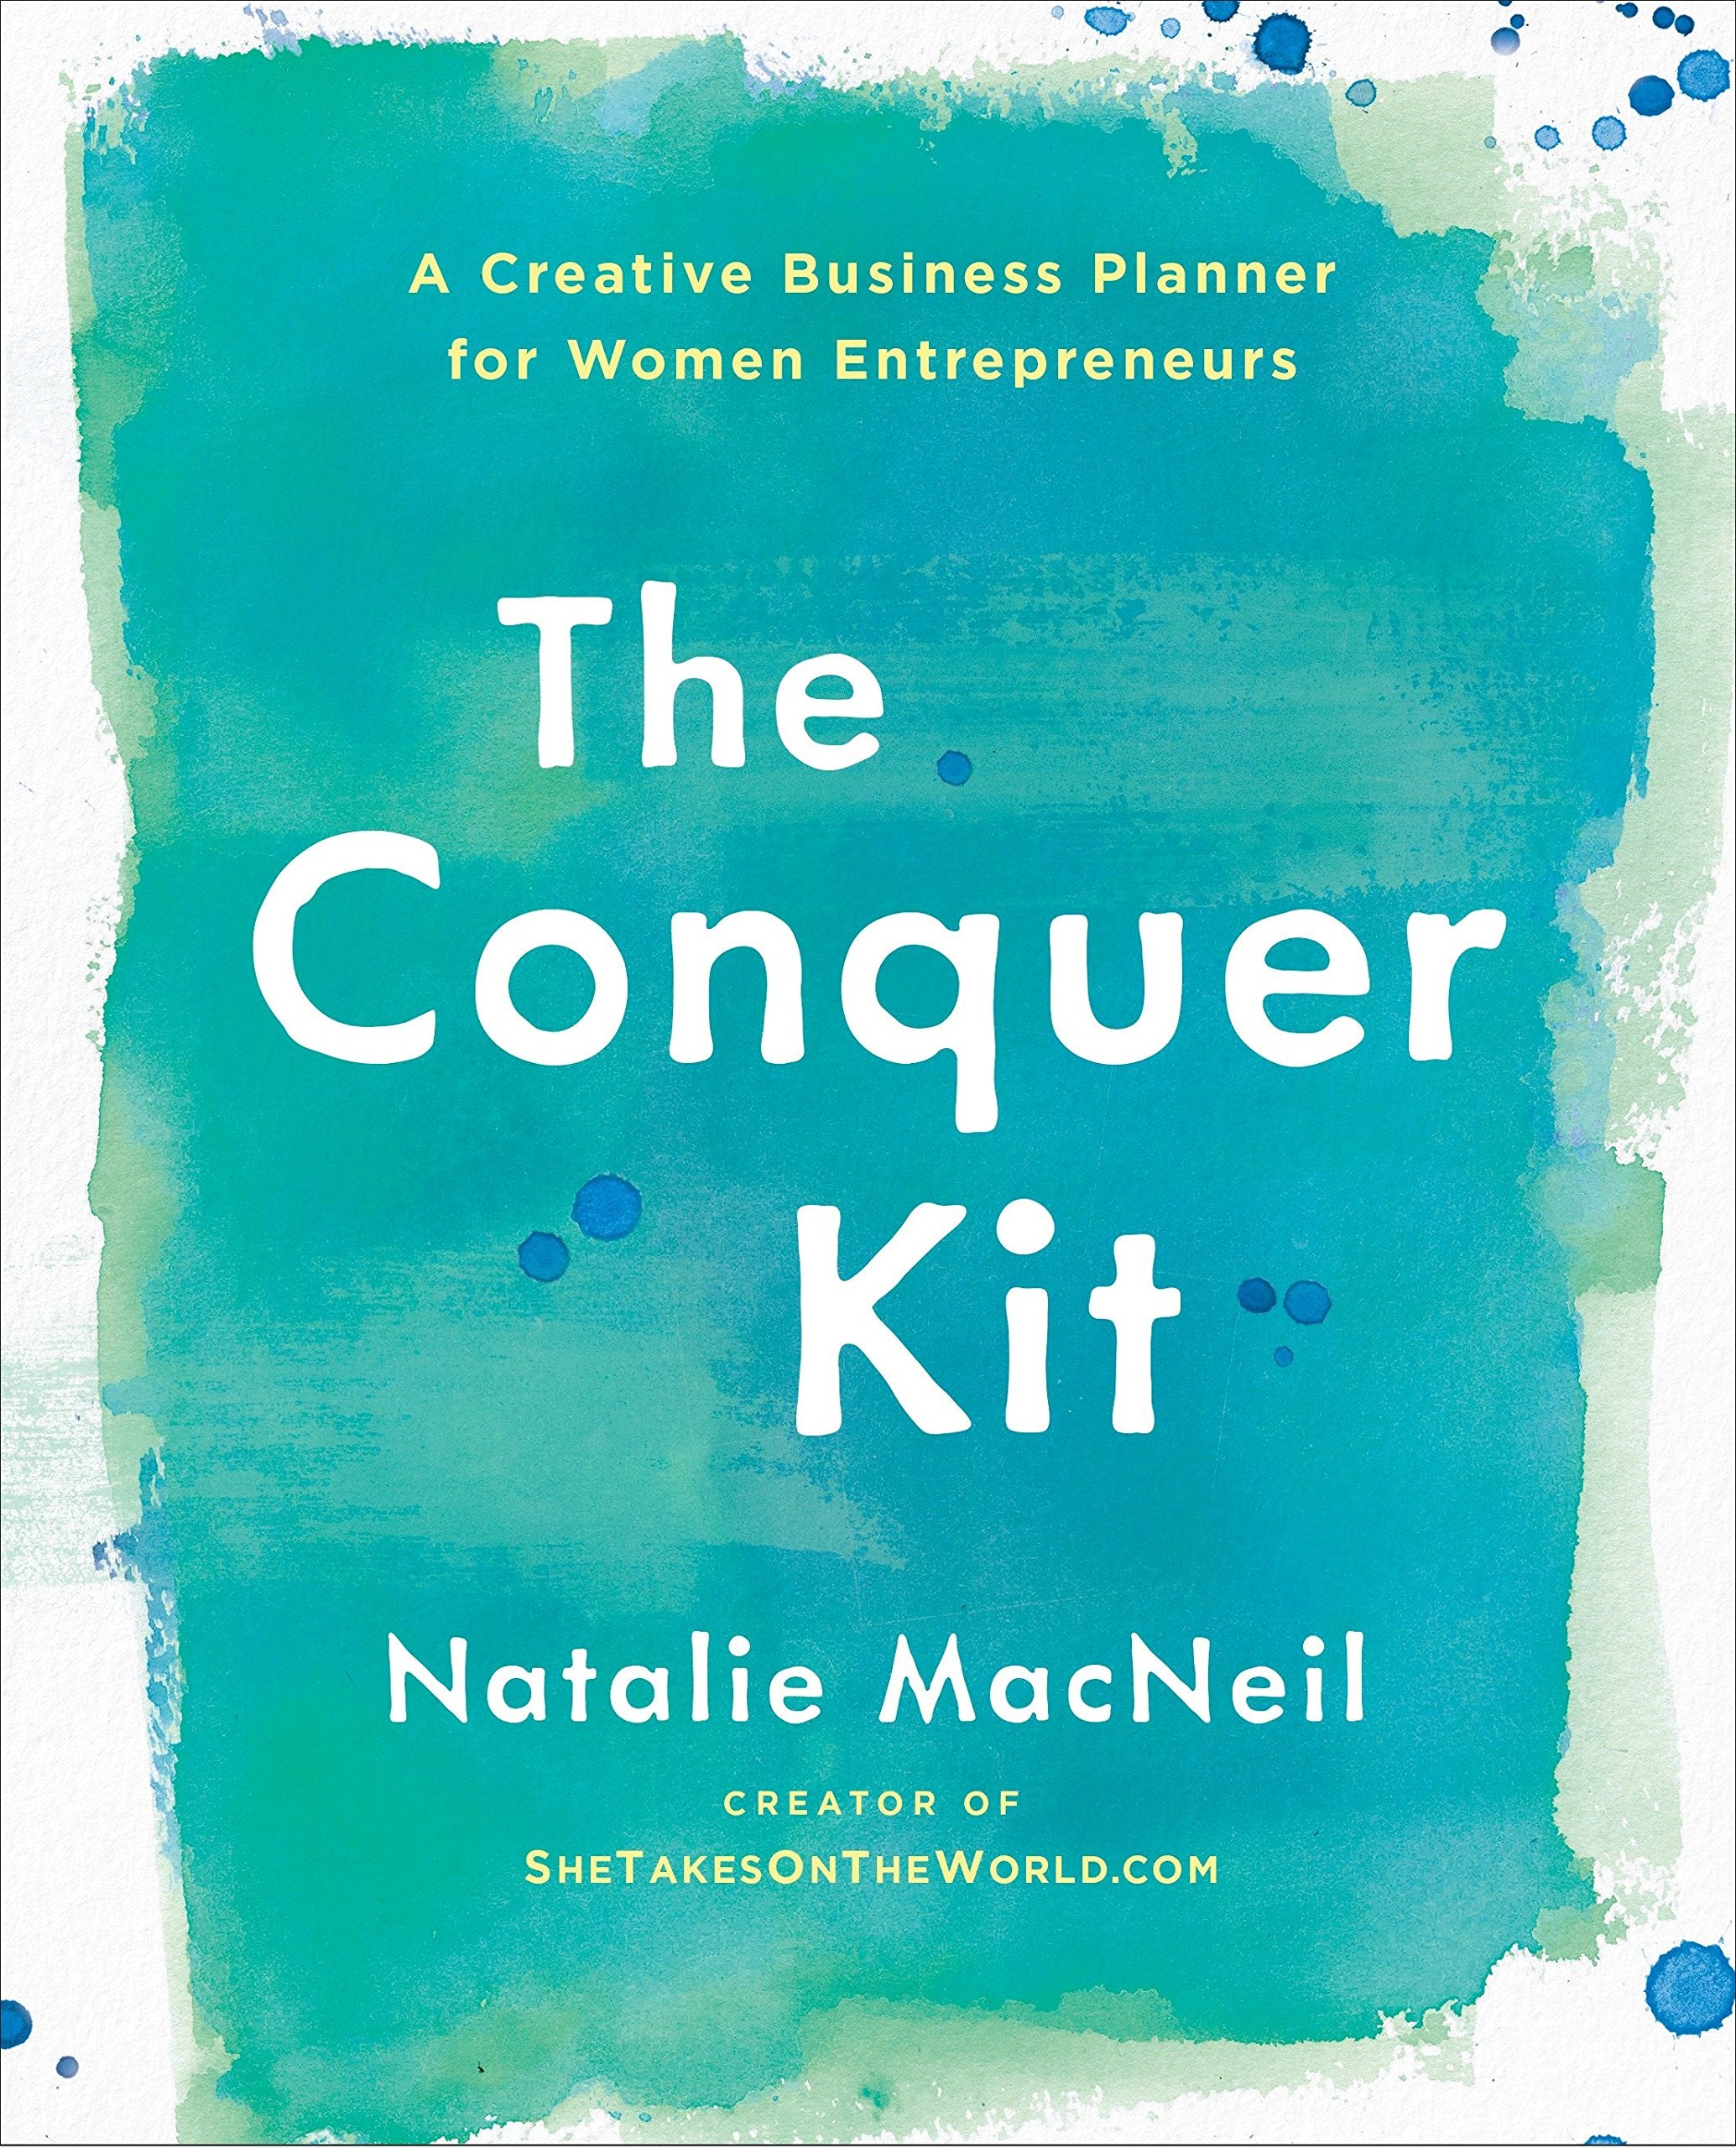 The Conquer Kit: A Creative Business Planner for Women Entrepreneurs by Natalie MacNeil